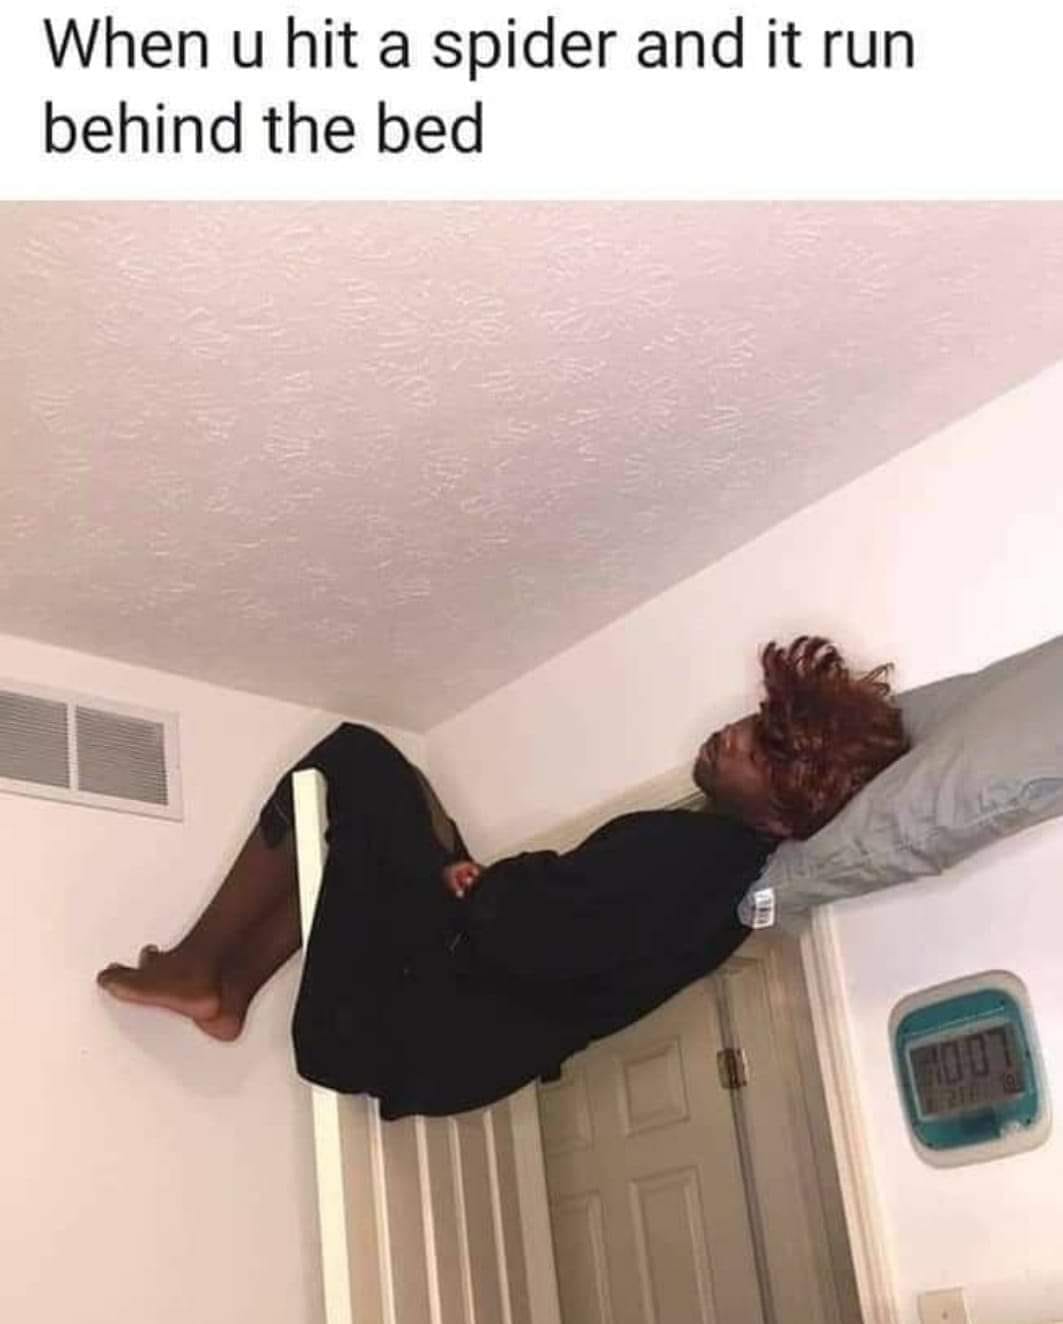 spider memes - When u hit a spider and it run behind the bed